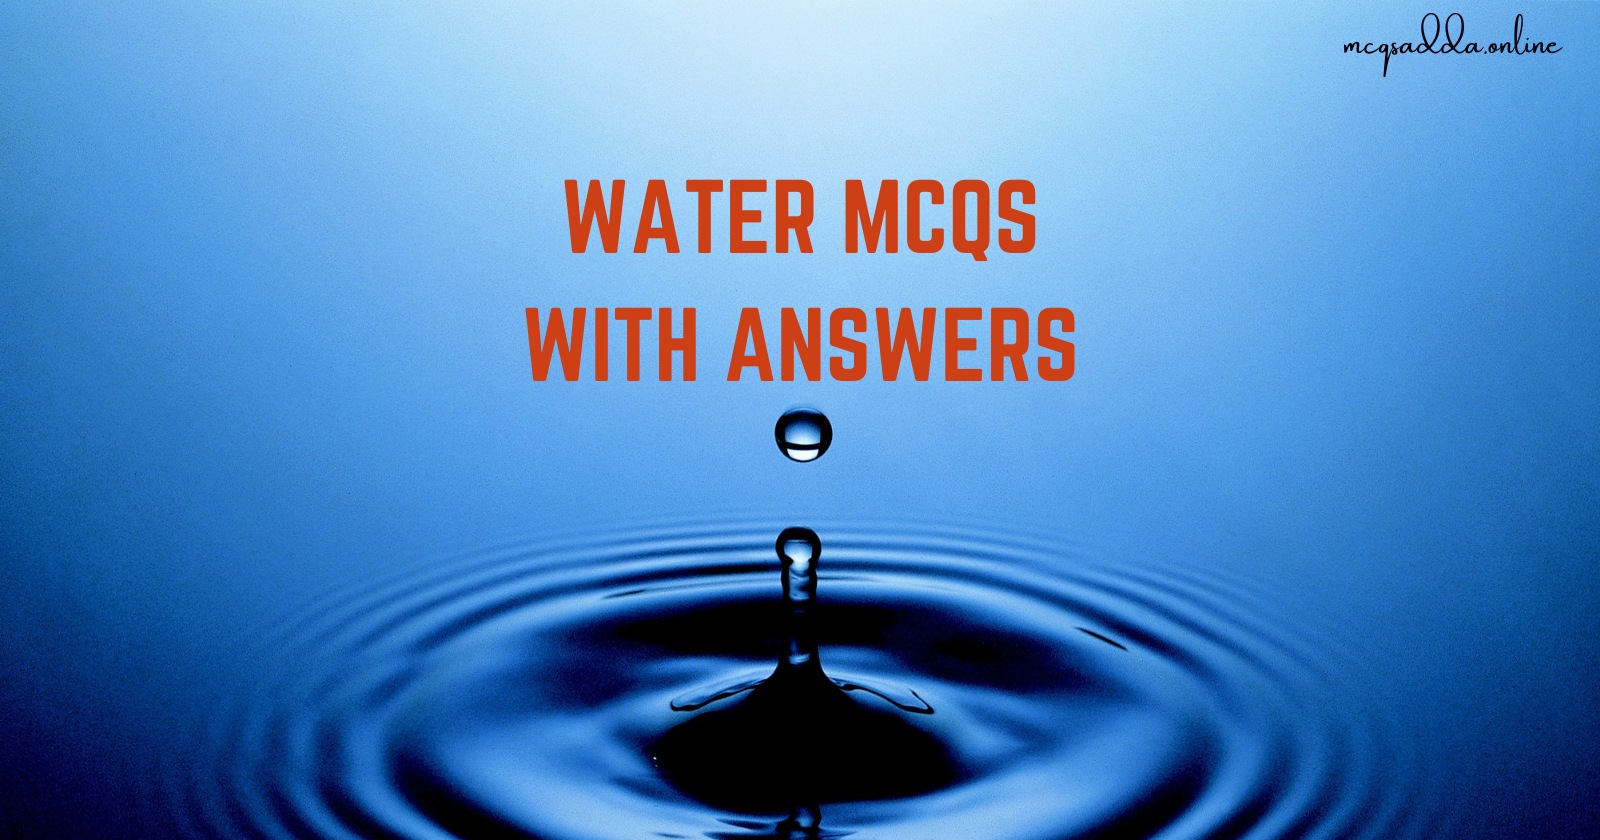 Water MCQs with answers